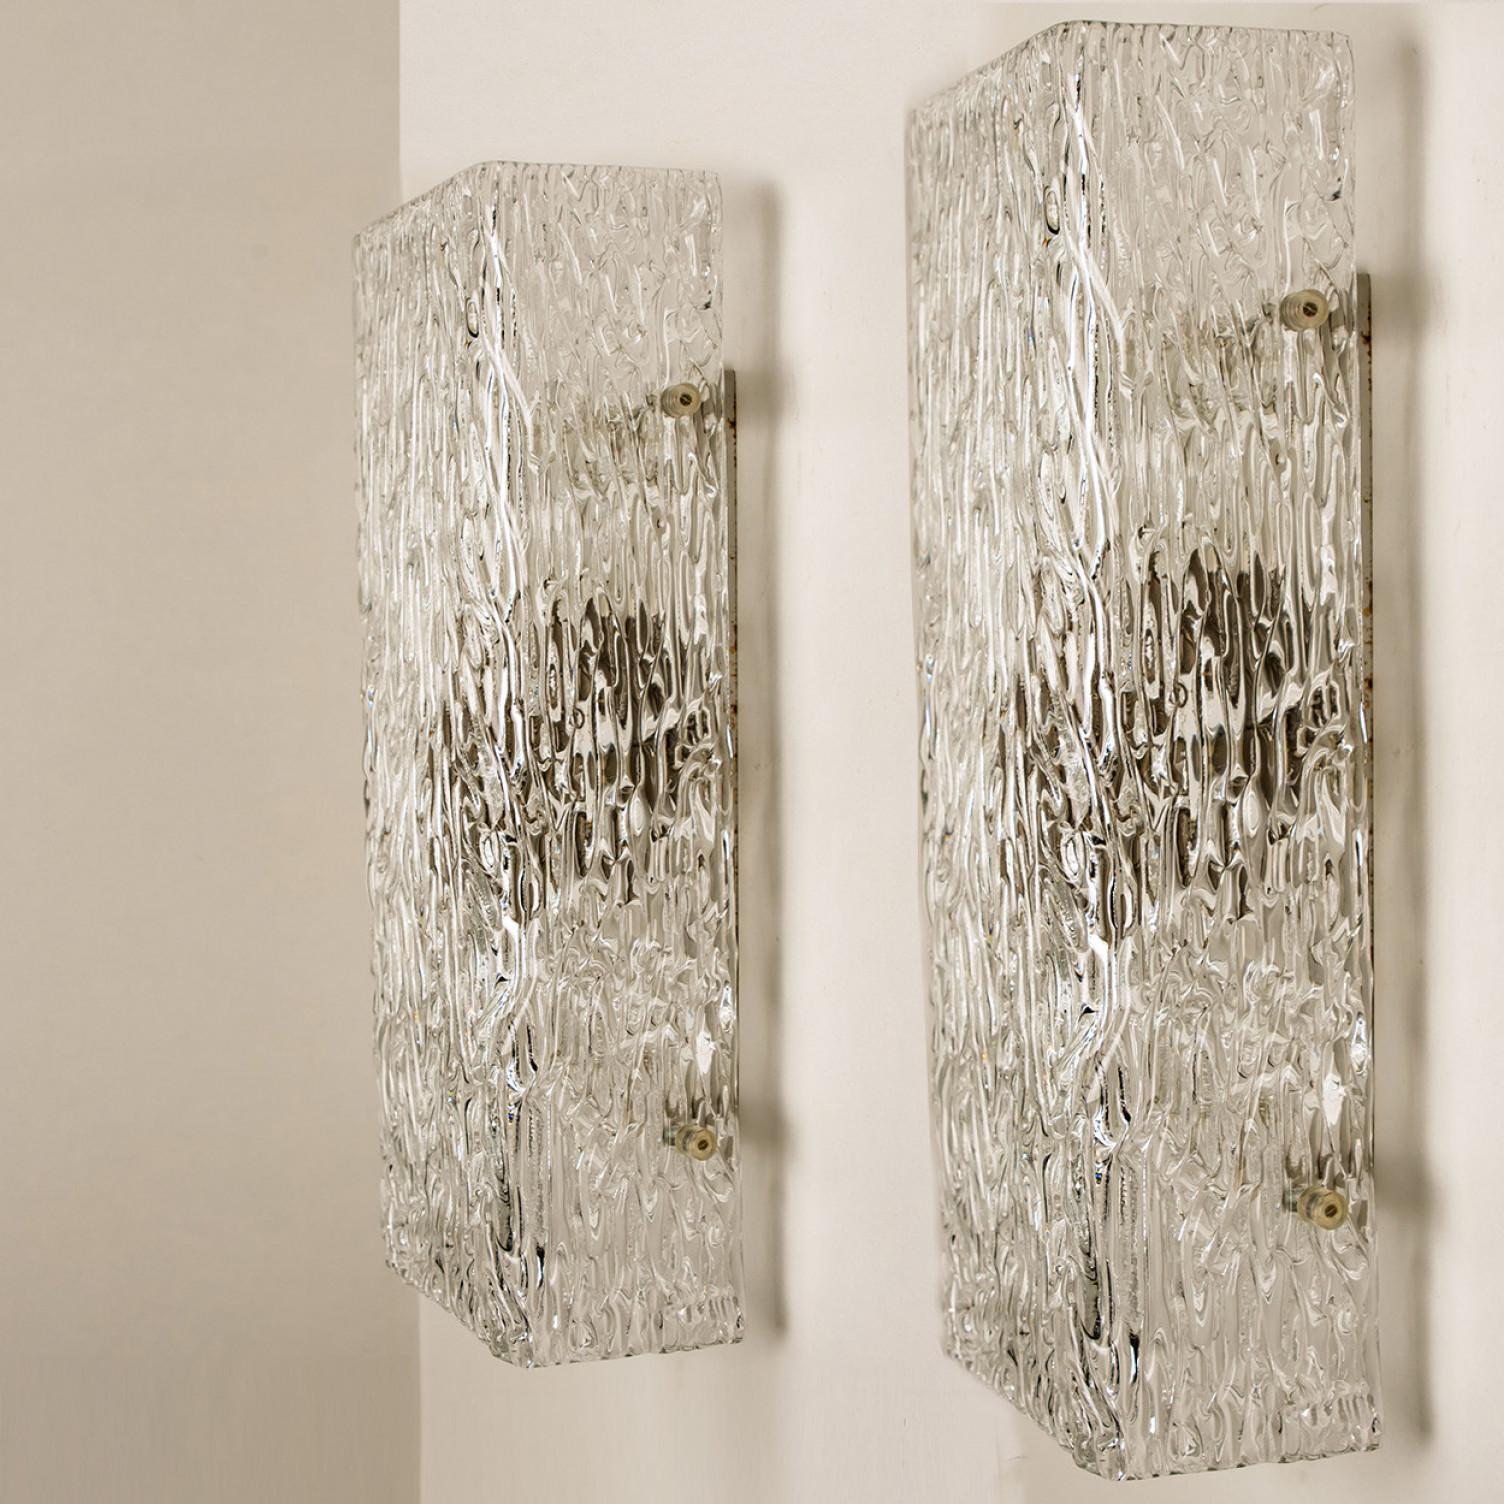 Mid-Century Modern Large Textured Rock Wave Glass Wall Lights by J.T. Kalmar, Austria, 1960s For Sale